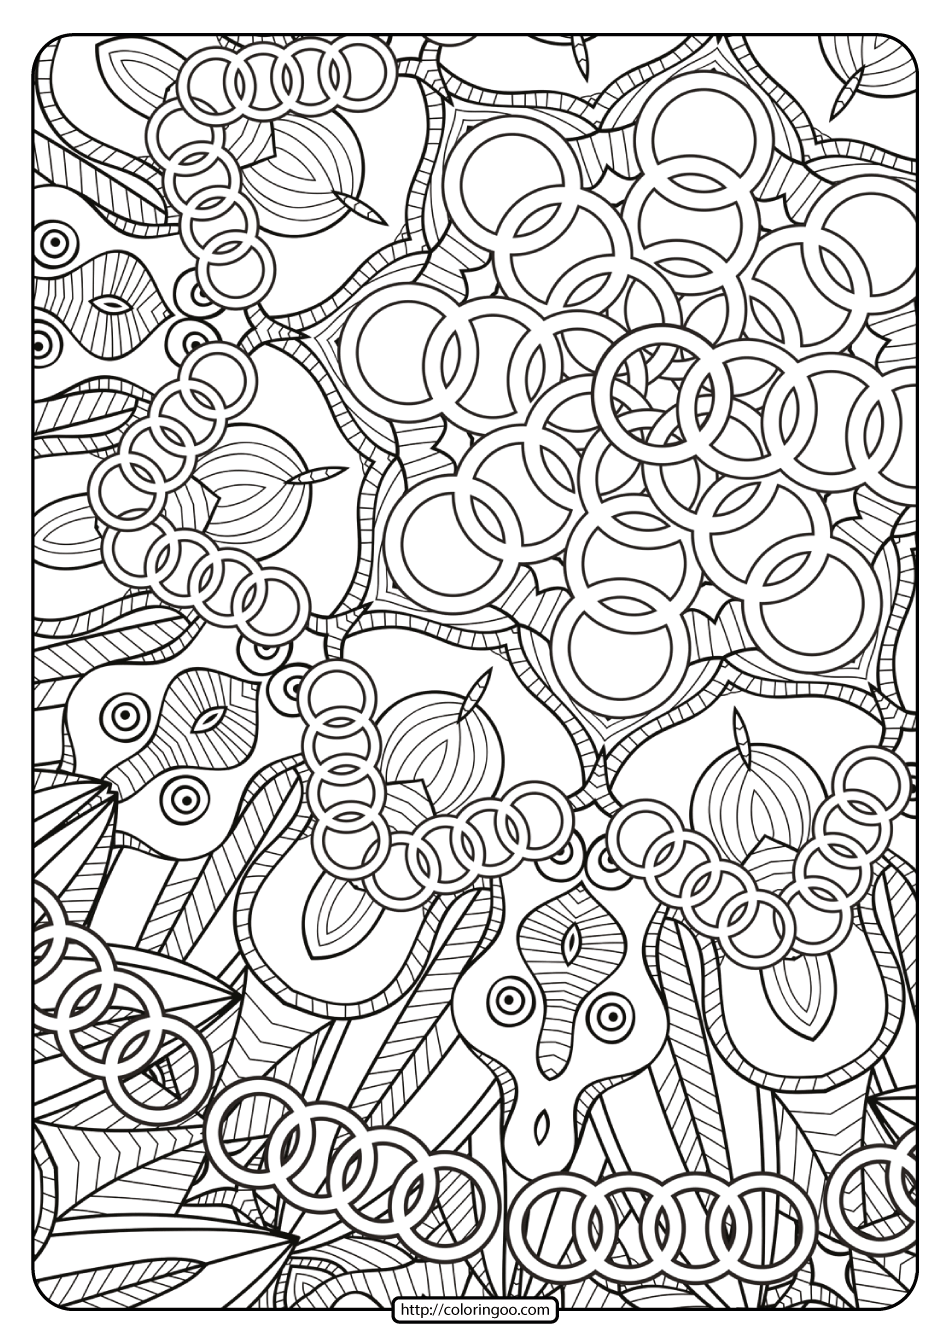 Printable Audi Cars Coloring Book & Page – 05